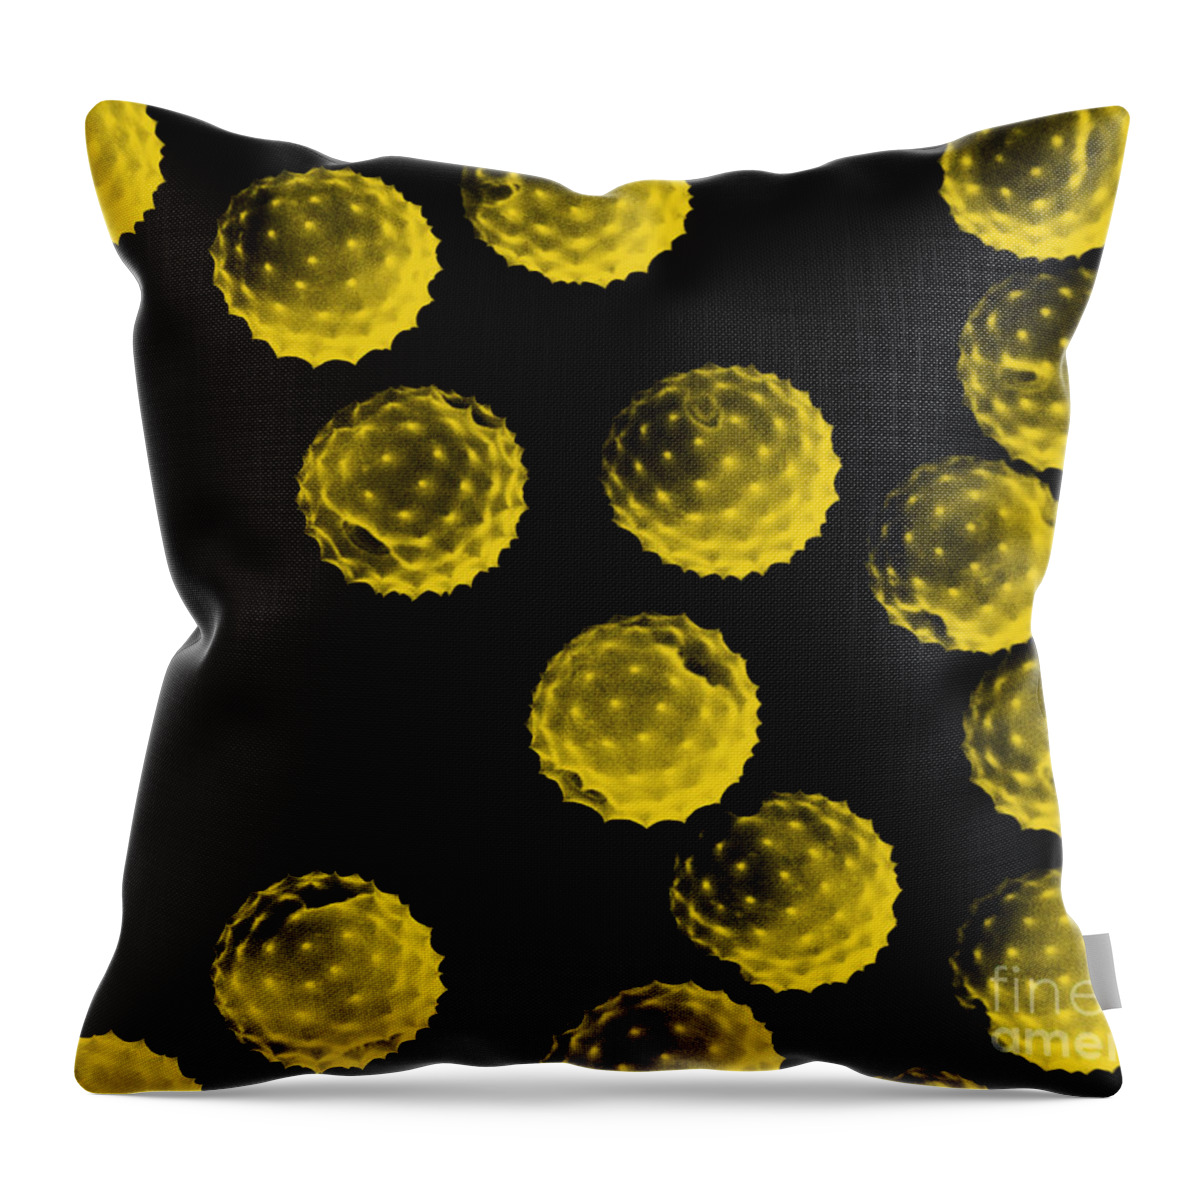 Botany Throw Pillow featuring the photograph Ragweed Pollen Sem by David M. Phillips